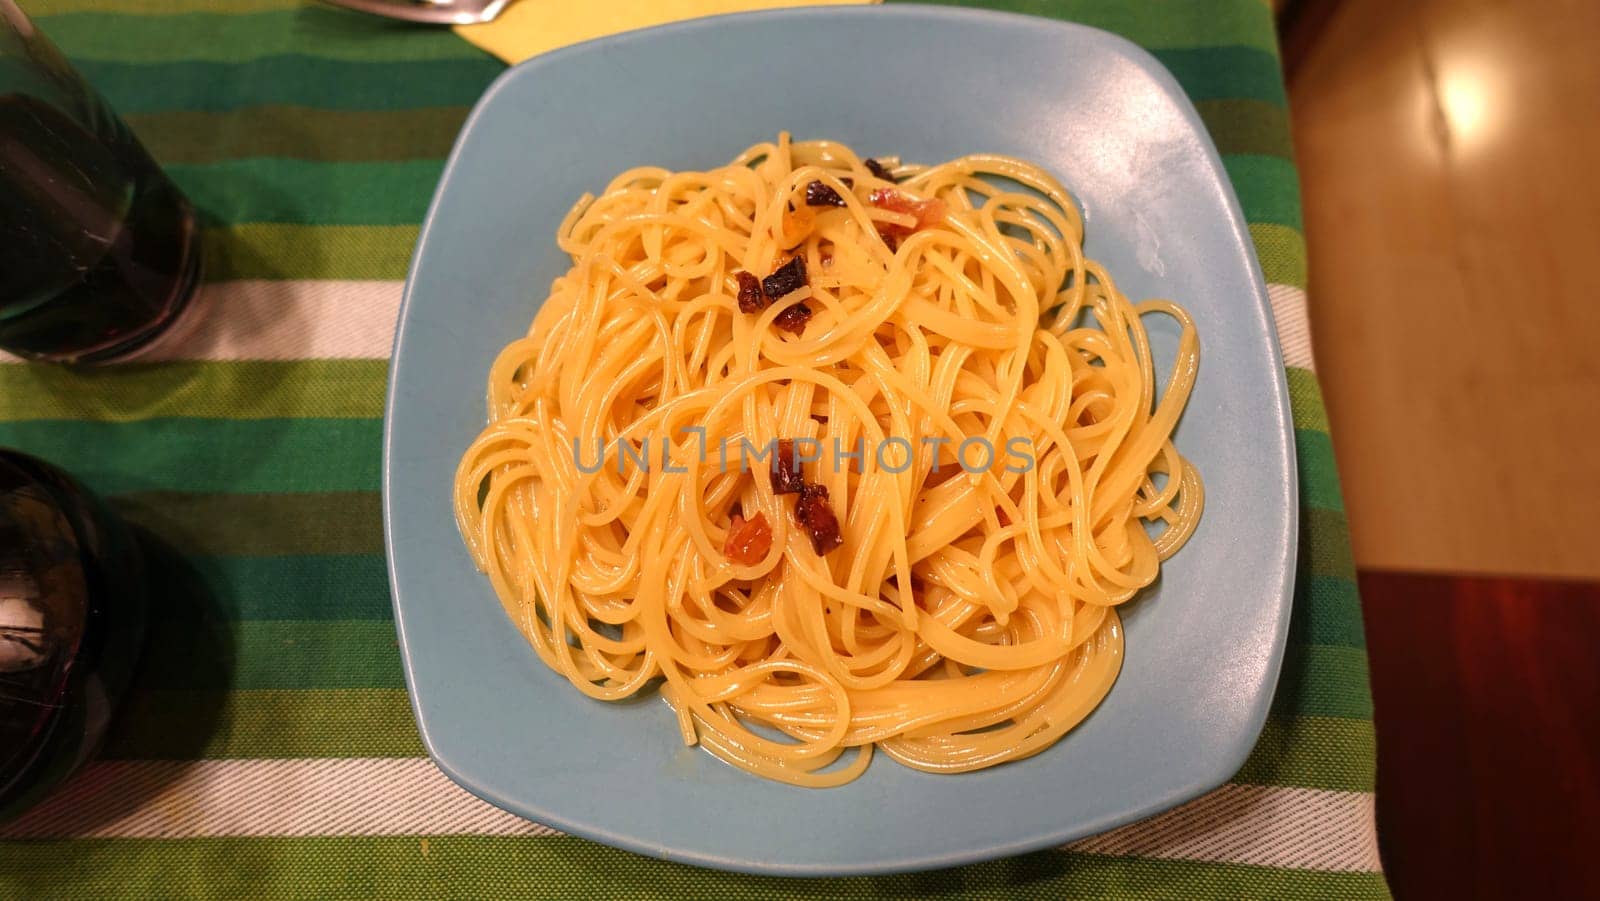 A plate of spaghetti carbonara ready at the table with a quarter of red wine.